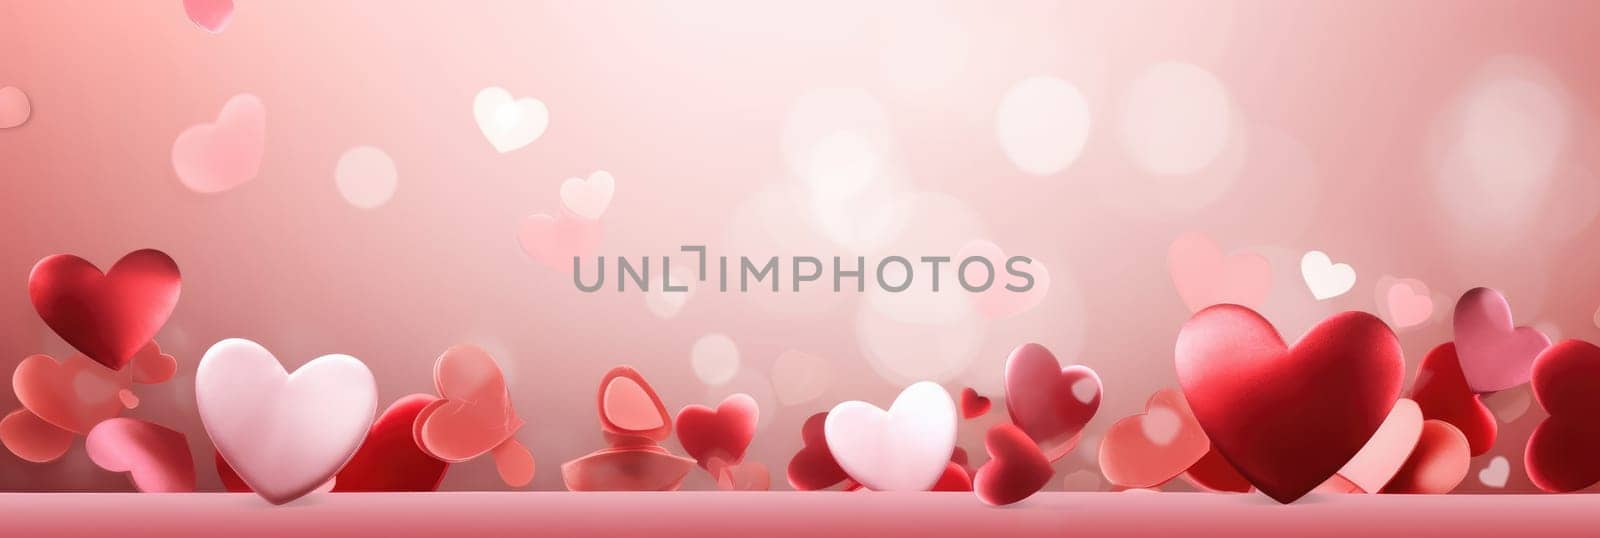 St. Valentines day, wedding banner with abstract illustrated red, pink flying hearts on pink bokeh background. Use for cute love sale banners, vouchers or greeting cards. Concept love, copy space